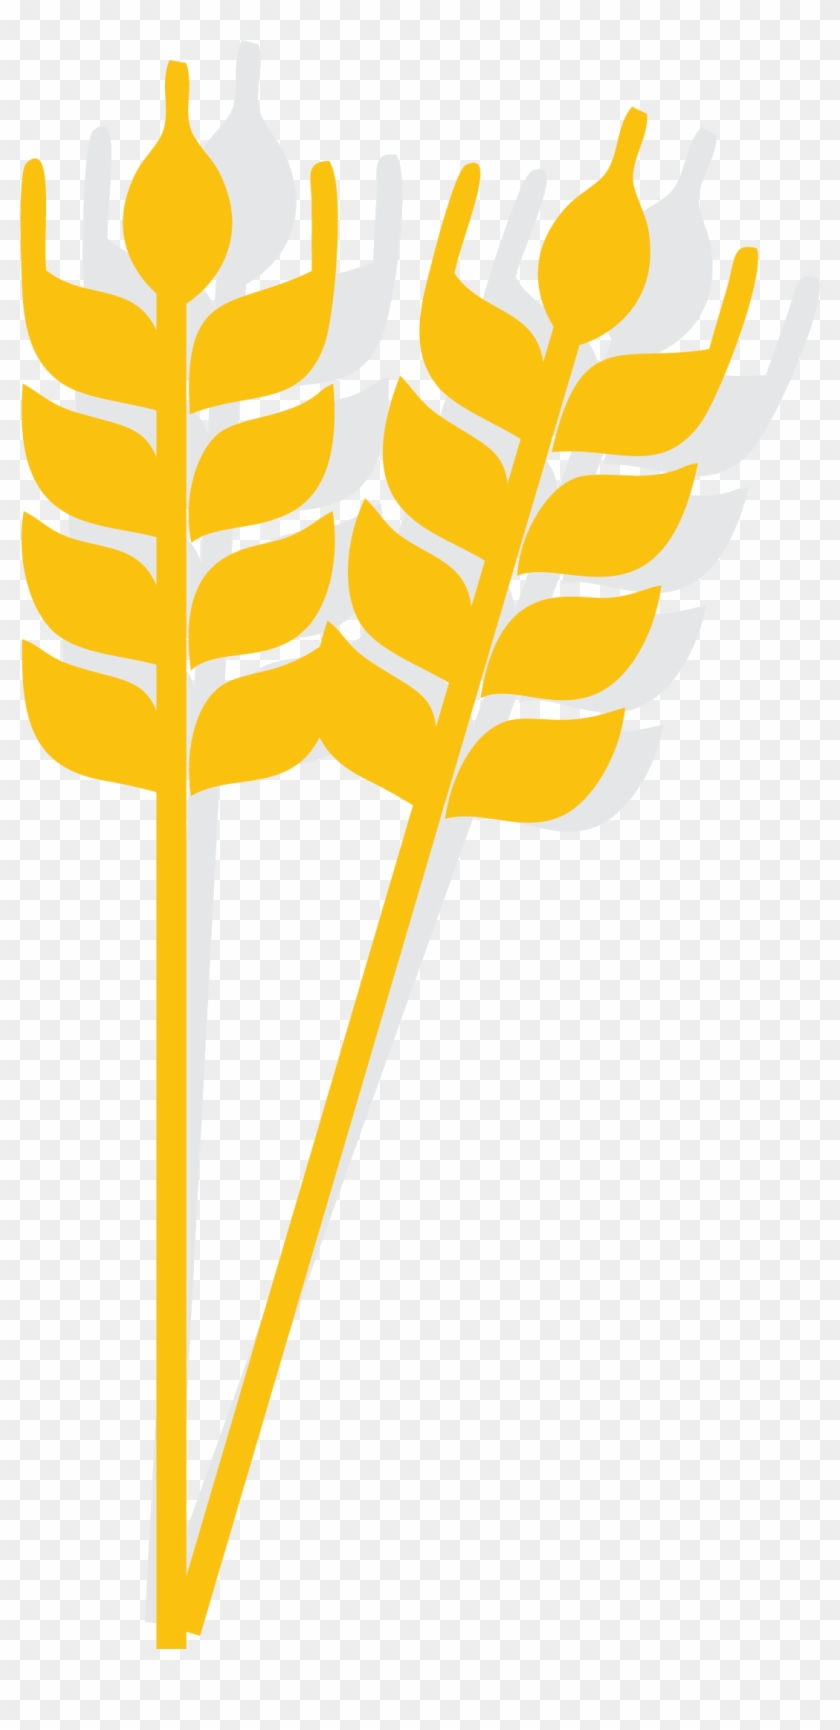 Rice Cartoon Wheat Icon - Rice Cartoon Wheat Icon - Free Transparent PNG  Clipart Images Download